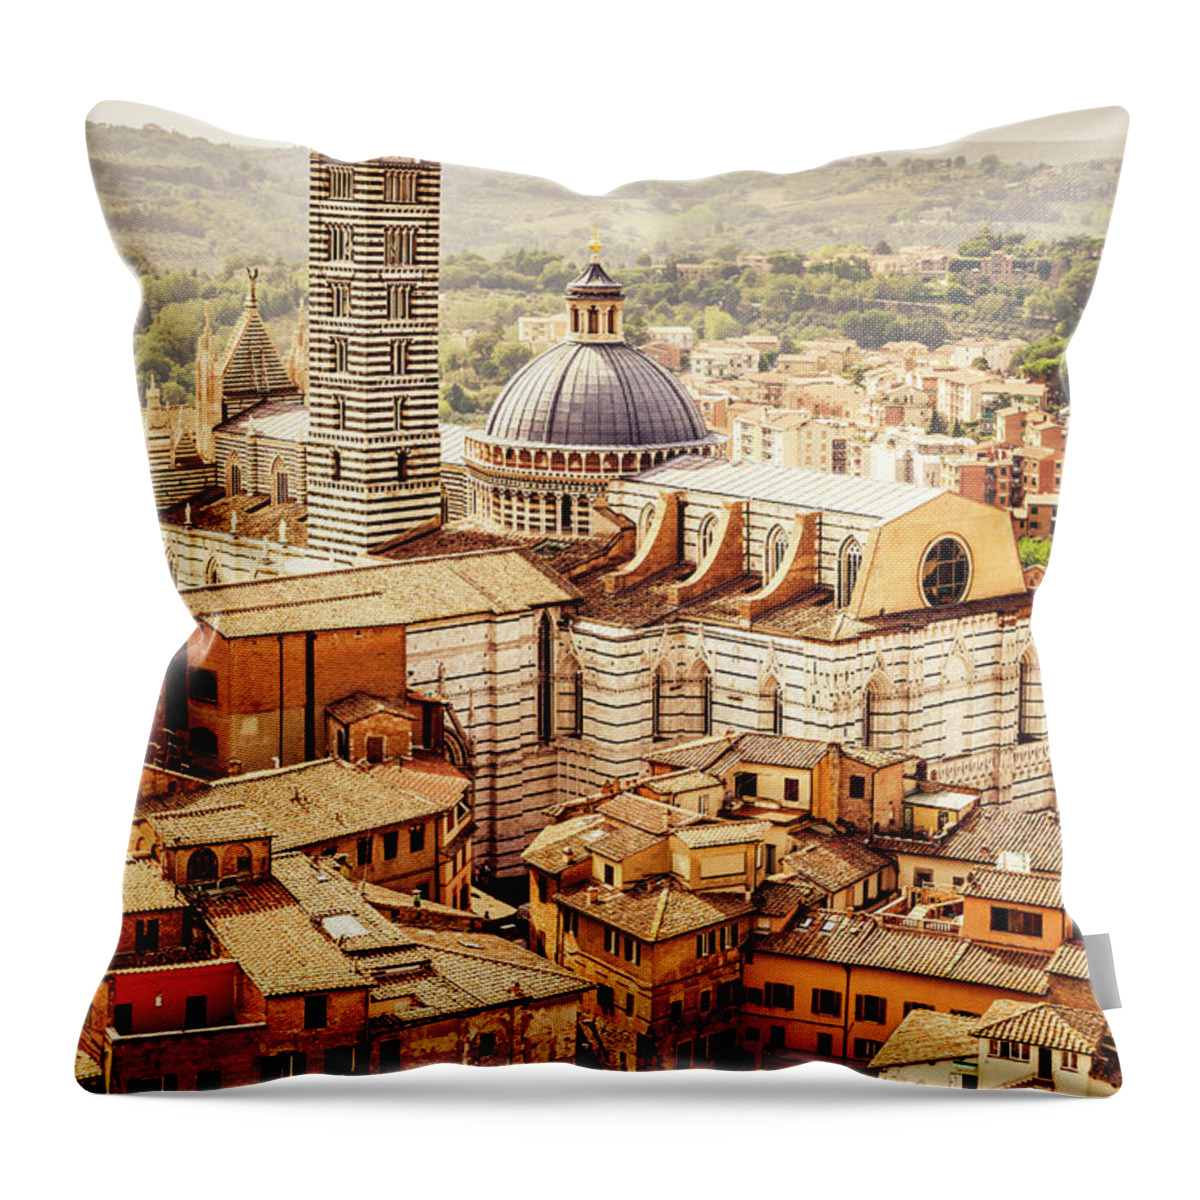 Gothic Style Throw Pillow featuring the photograph Siena Cathedral Over The Old Town by Giorgiomagini